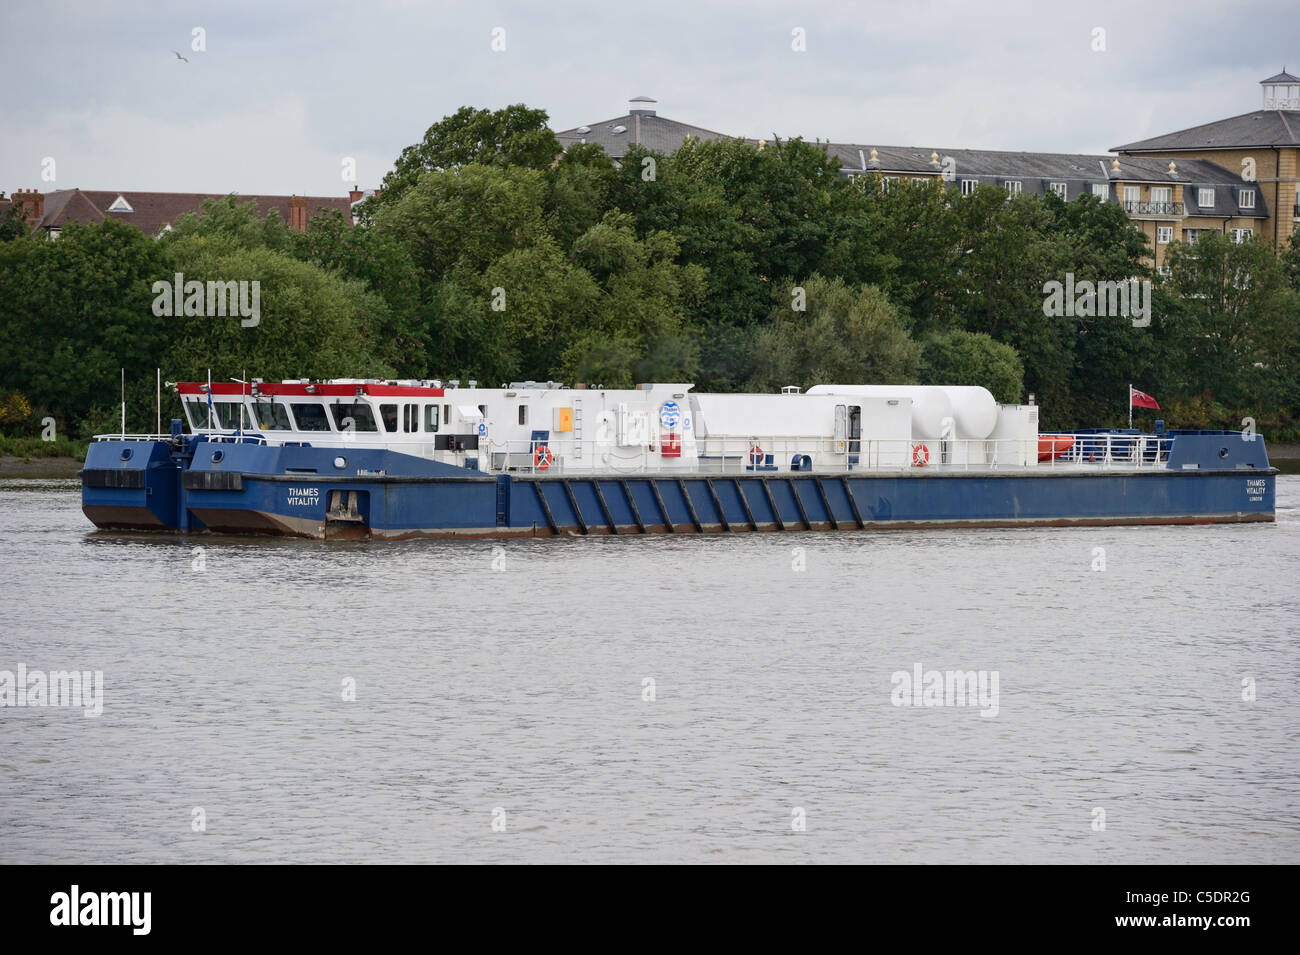 Thames Vitality, an oxygenation vessel operated by Thames Water, on the river Thames near Hammersmith, London, England, UK Stock Photo